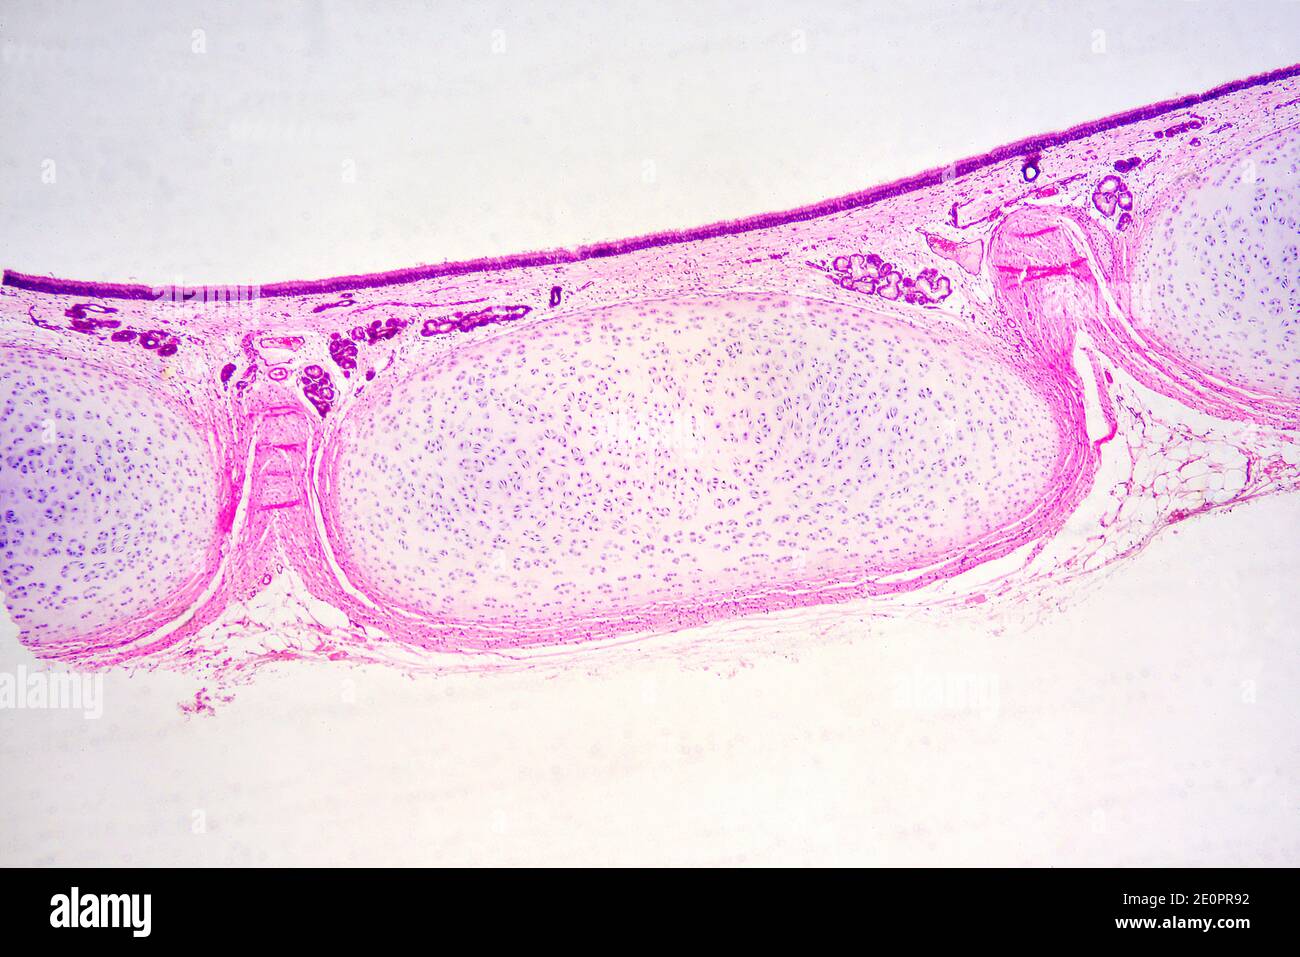 Human epiglottis section showing from up to down: respiratory epithelium, connective tissue, glands and elastic cartilage. X25 al 10 cm wide. Stock Photo